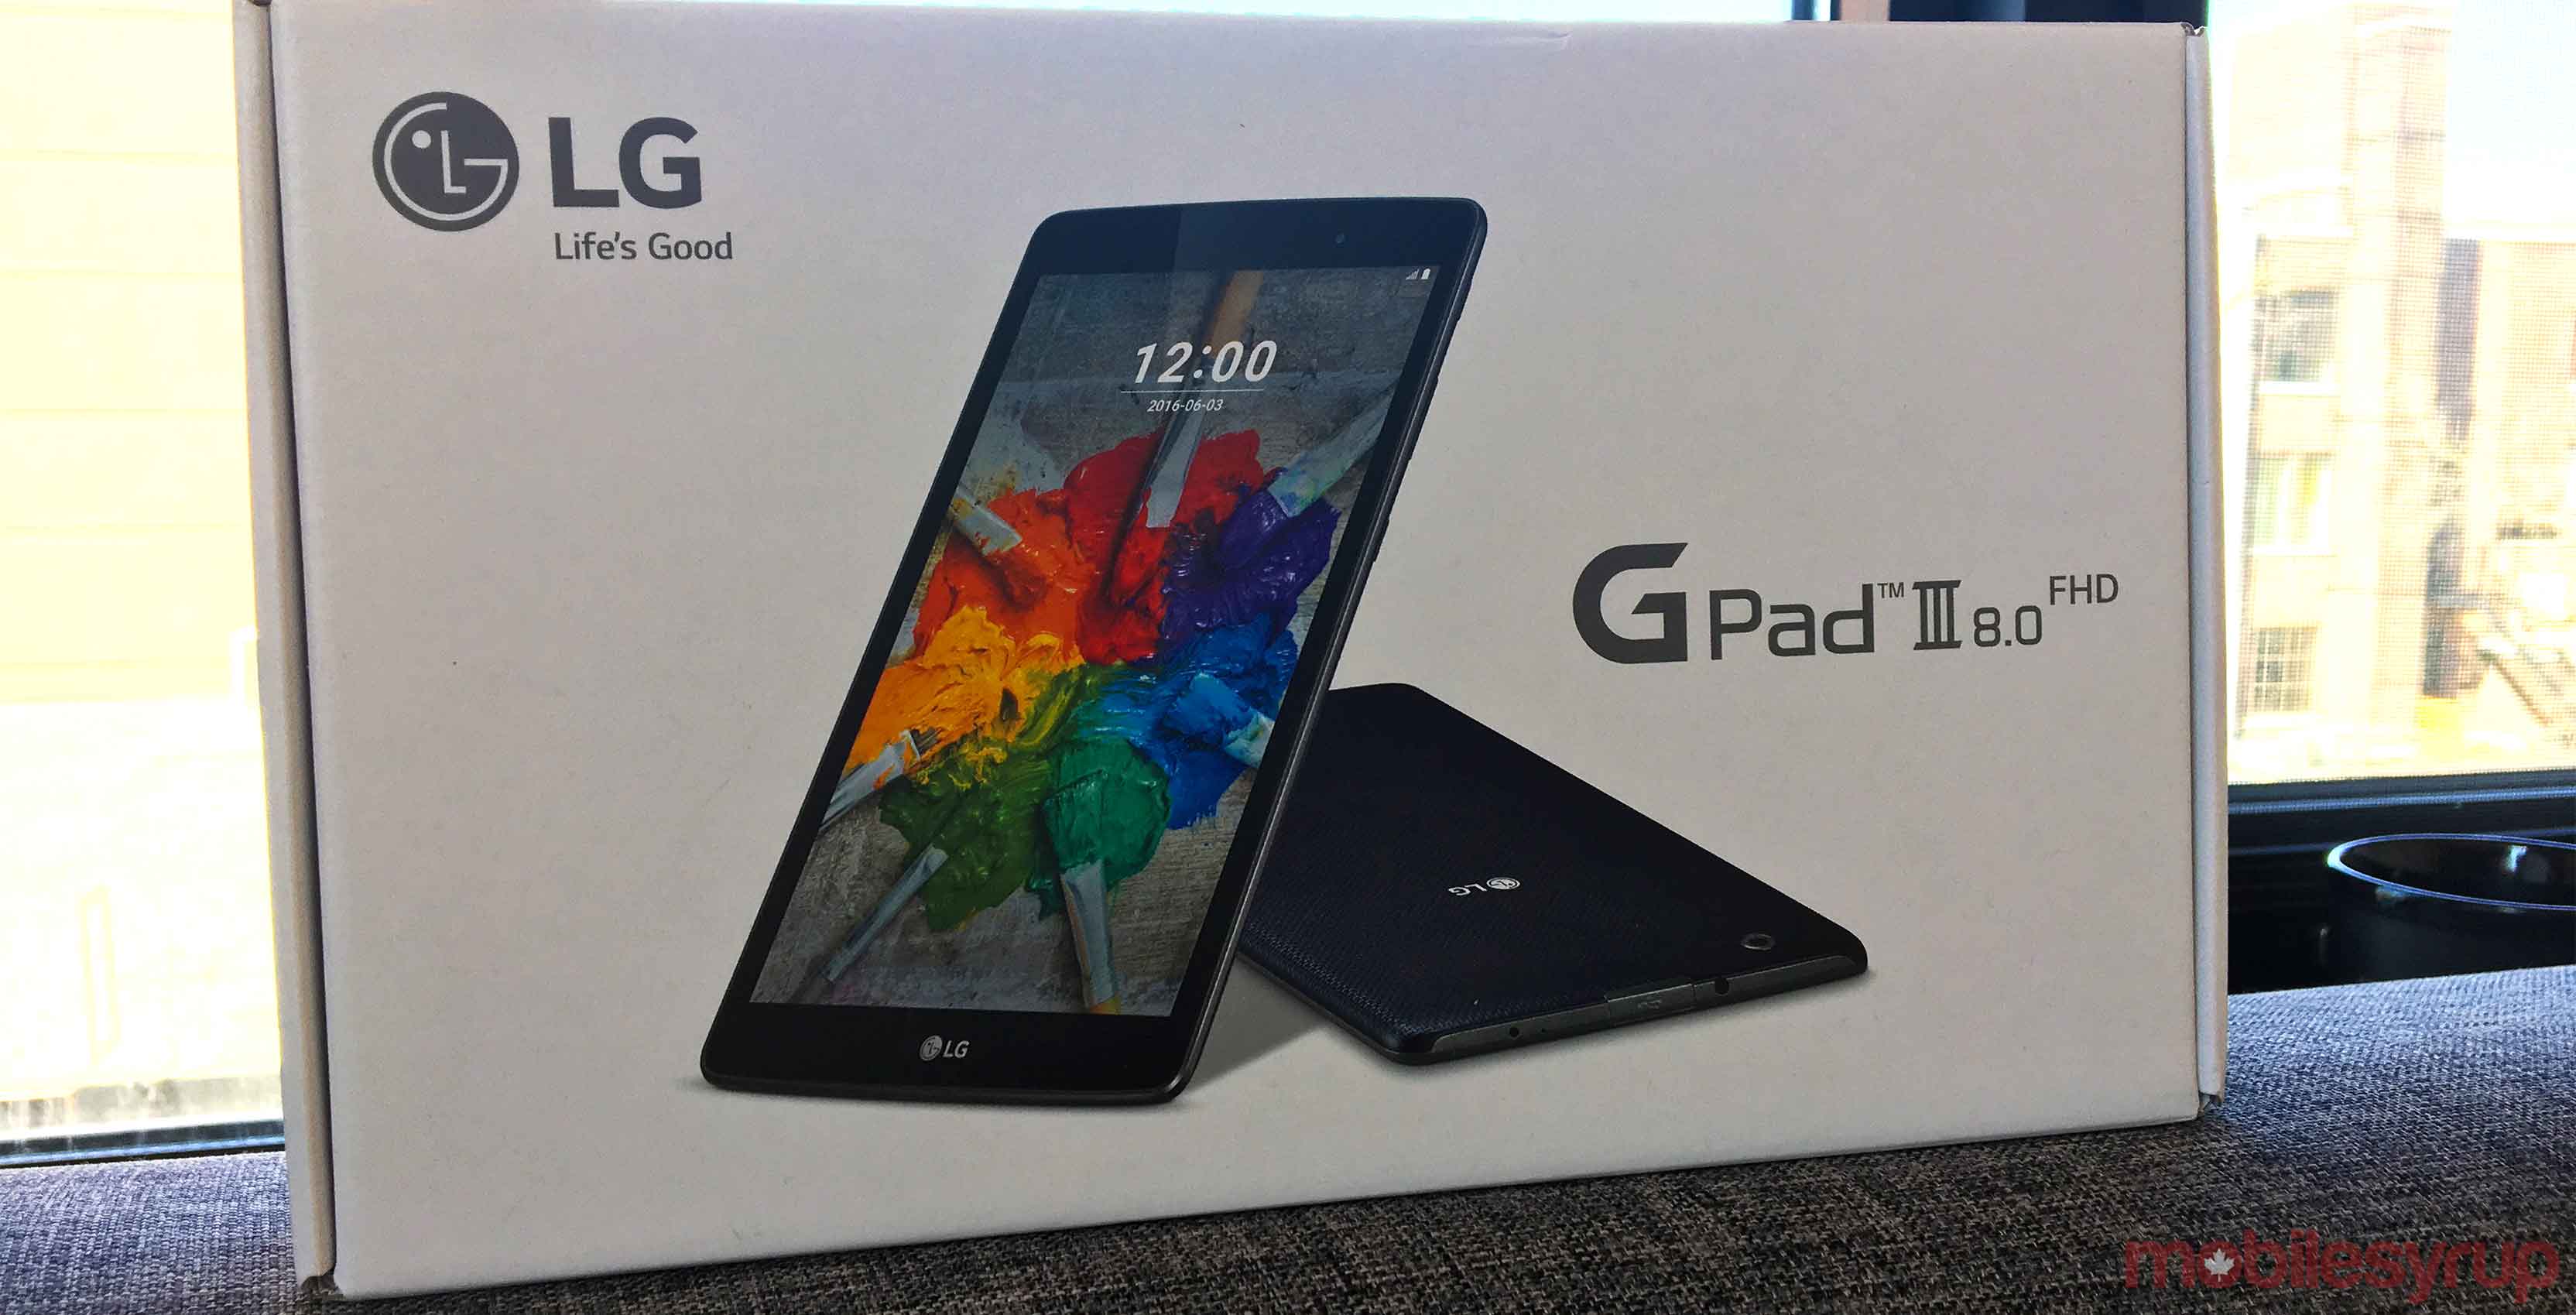 Android Nougat Now Available On Lg G Pad Iii 8 0 Tablets On Fido